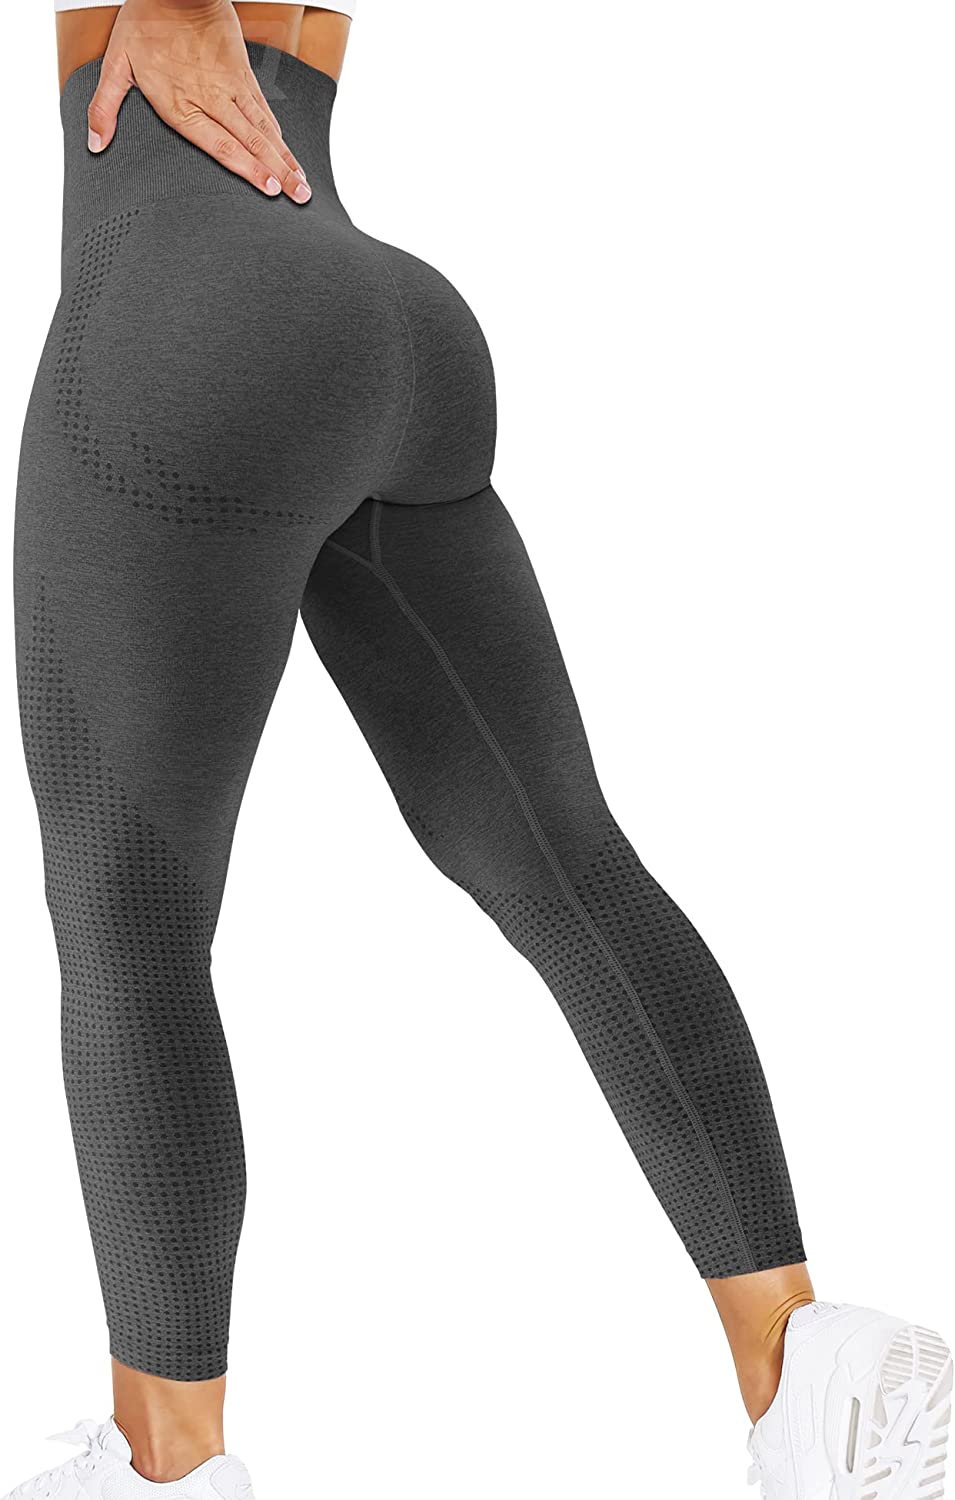 3D Snacks Print Funky Gym Leggings Seamless Sport Tights For Yoga, Gym, And  Sexy Legins From Qiyuan03, $11.46